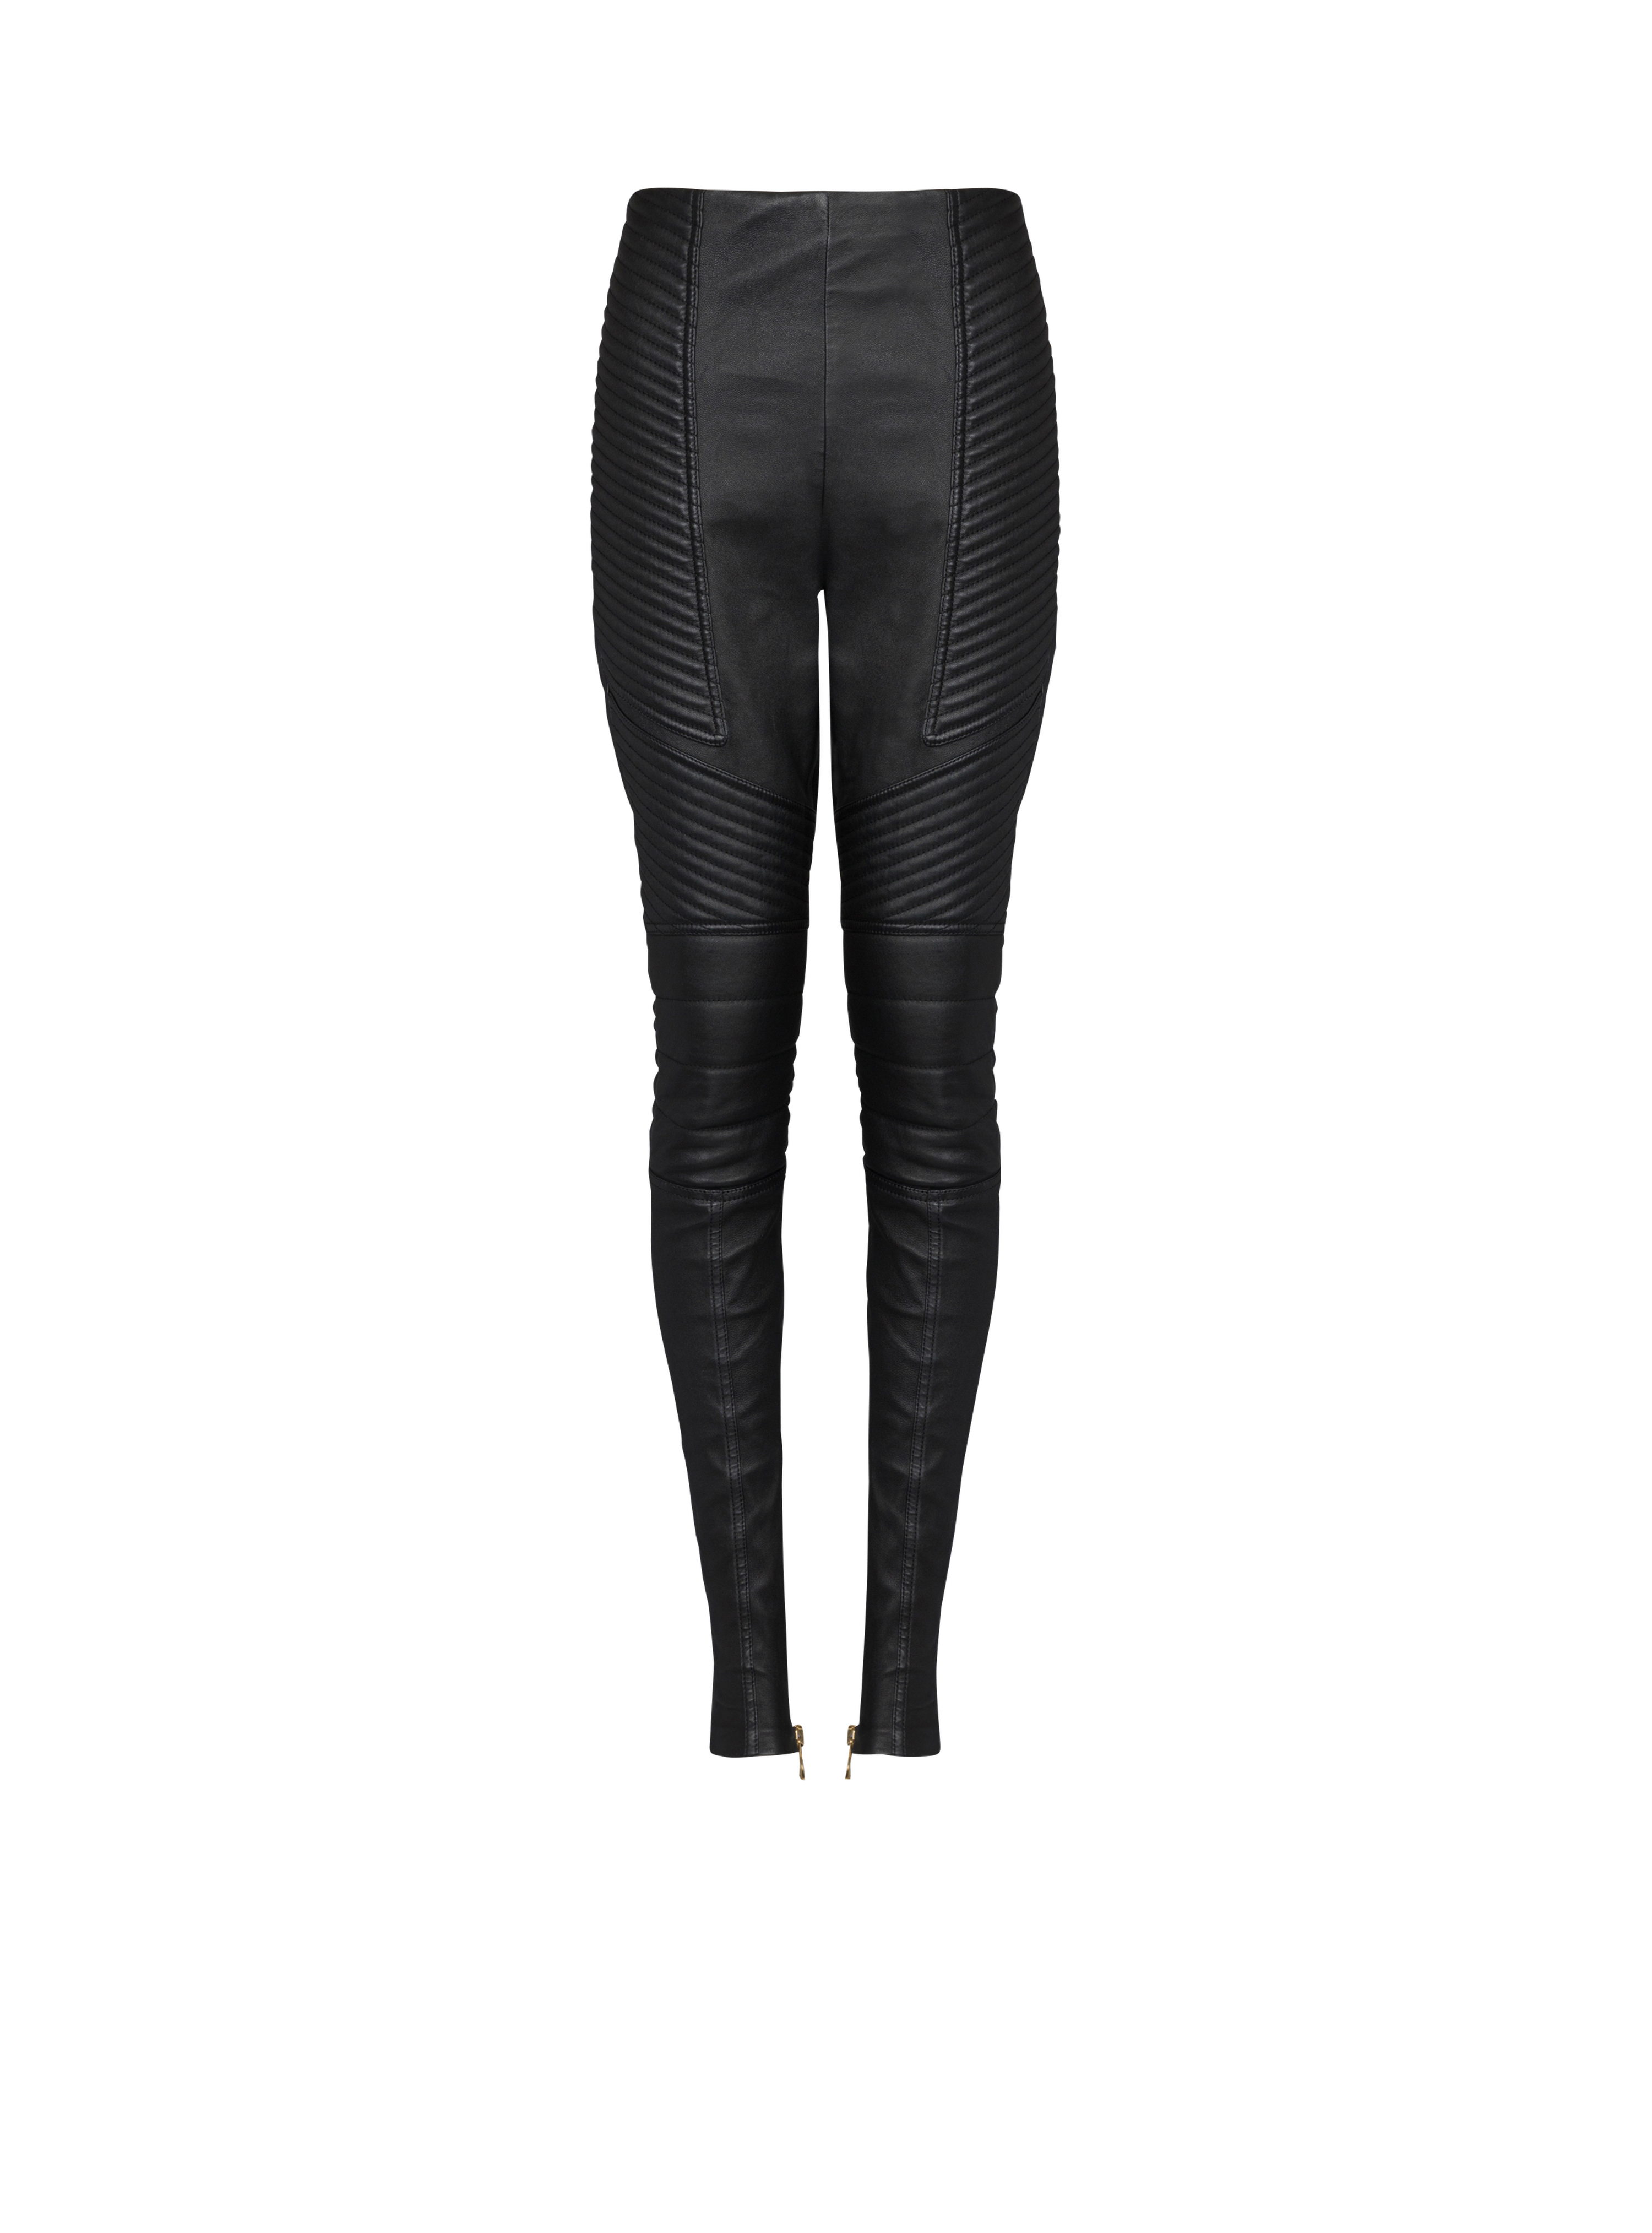 Slim-fit leather trousers, black